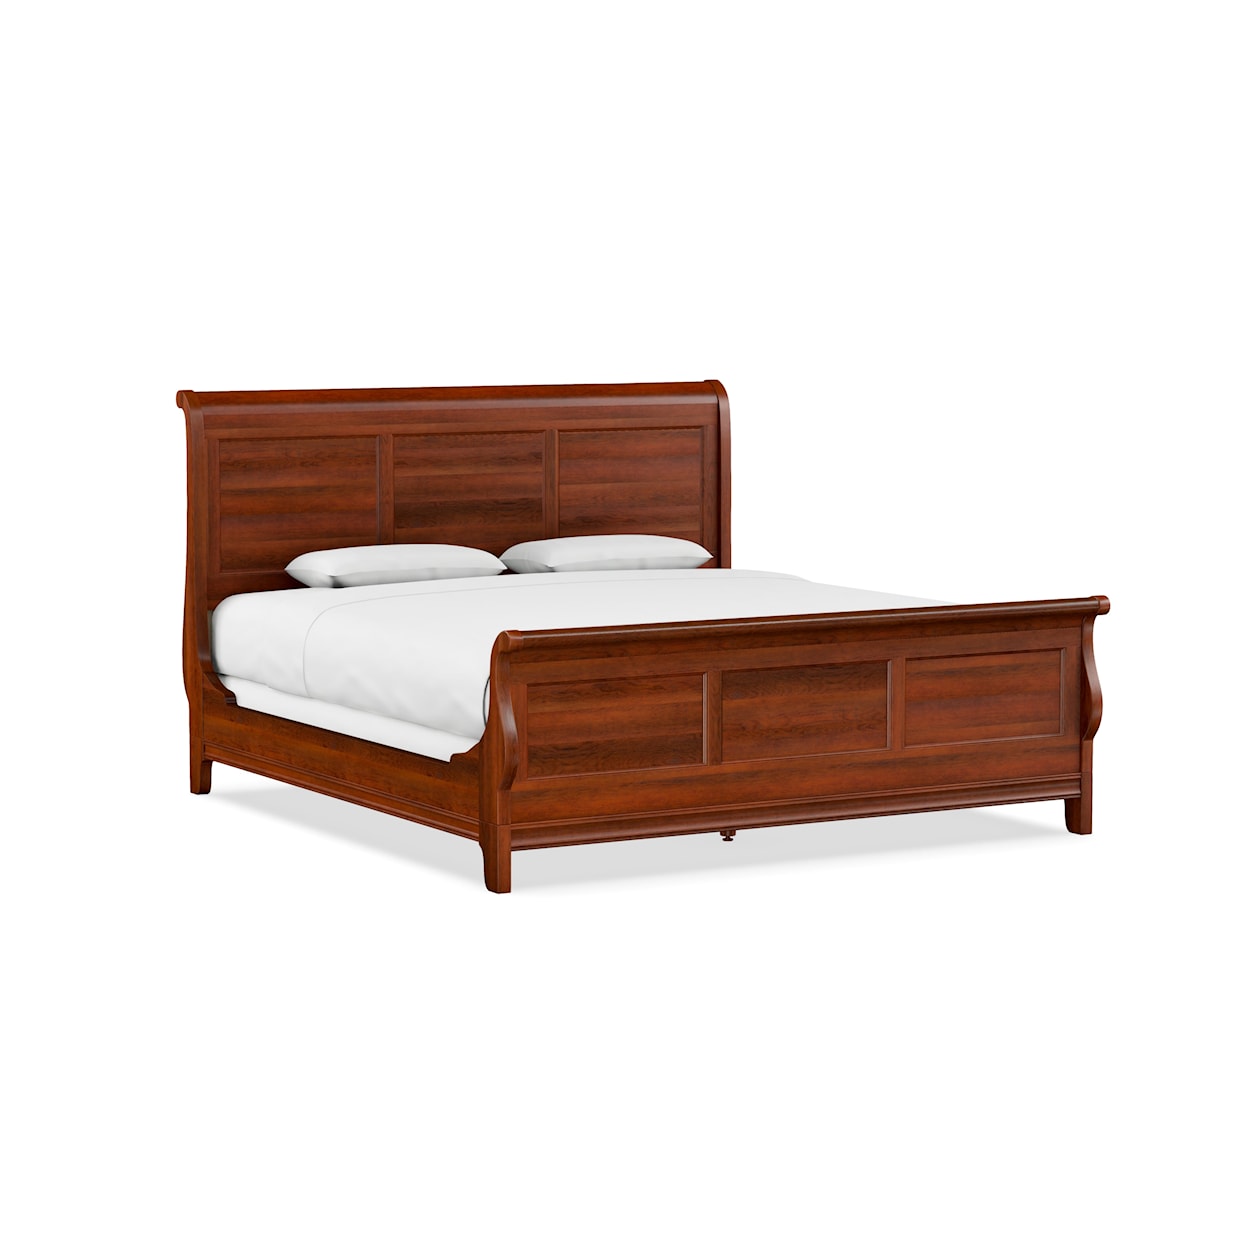 Durham Chateau Fontaine King Sleigh Bed